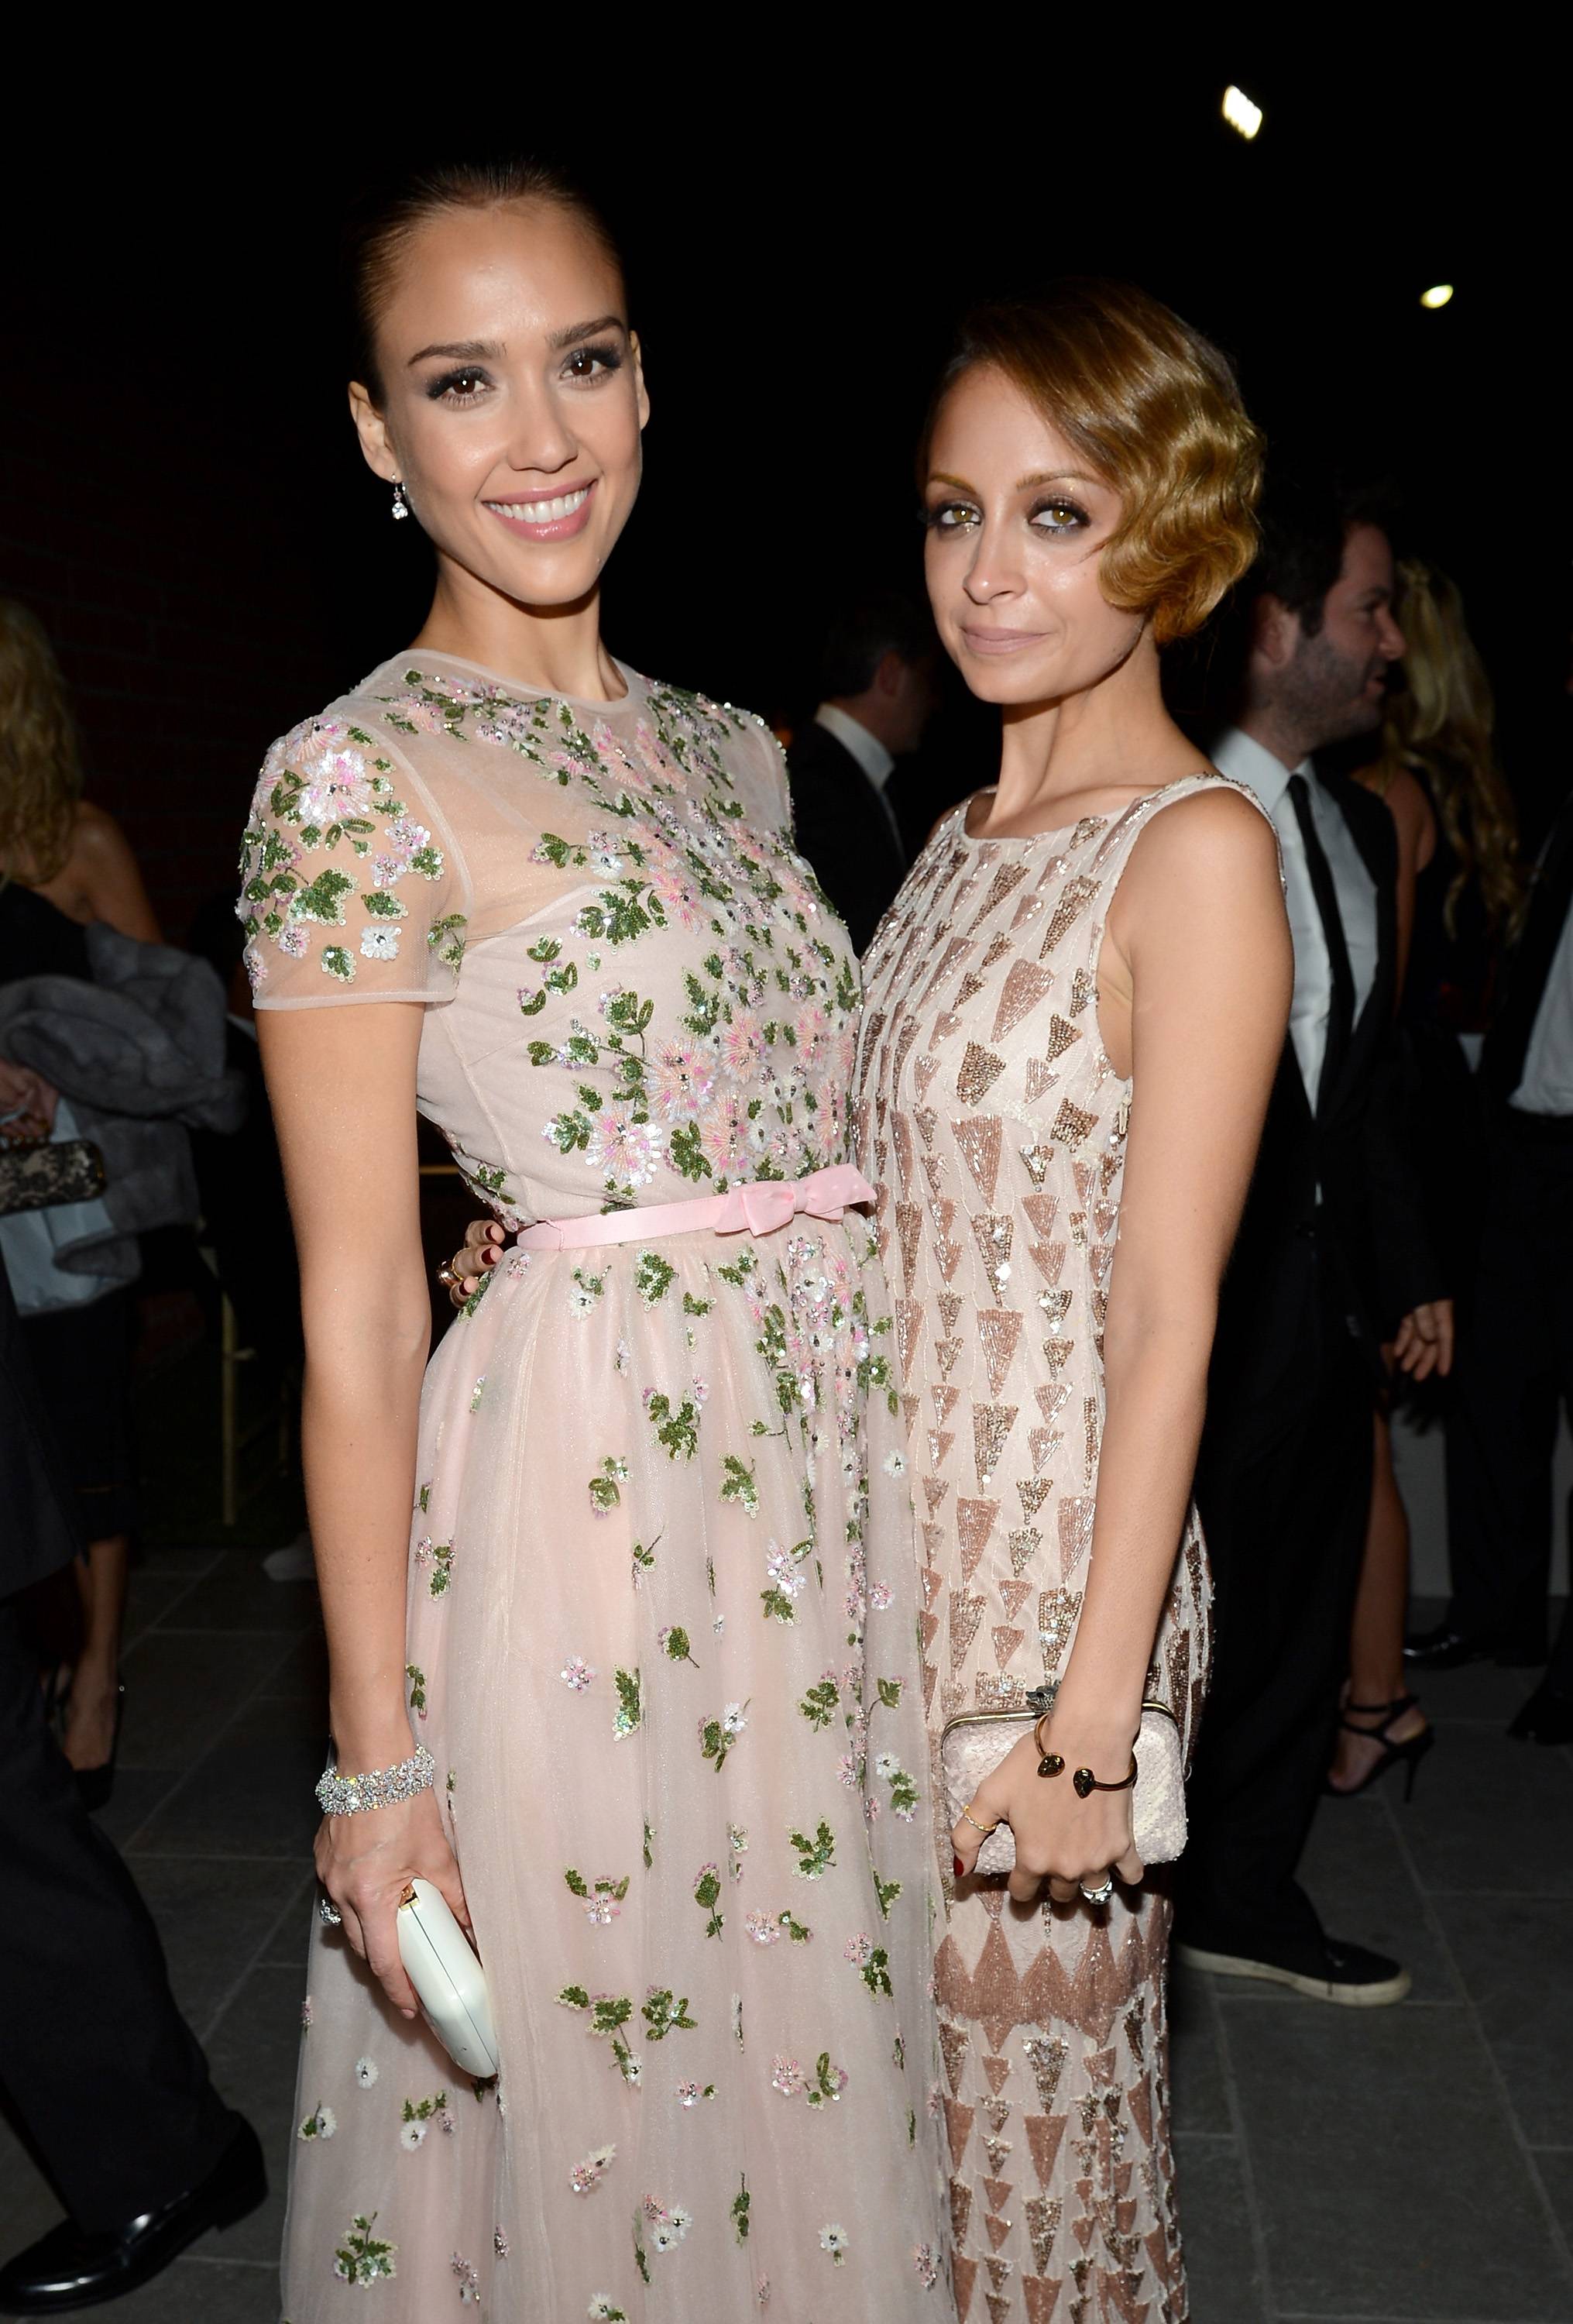 The First Annual Baby2Baby Gala Presented By Harry Winston Honoring Jessica Alba